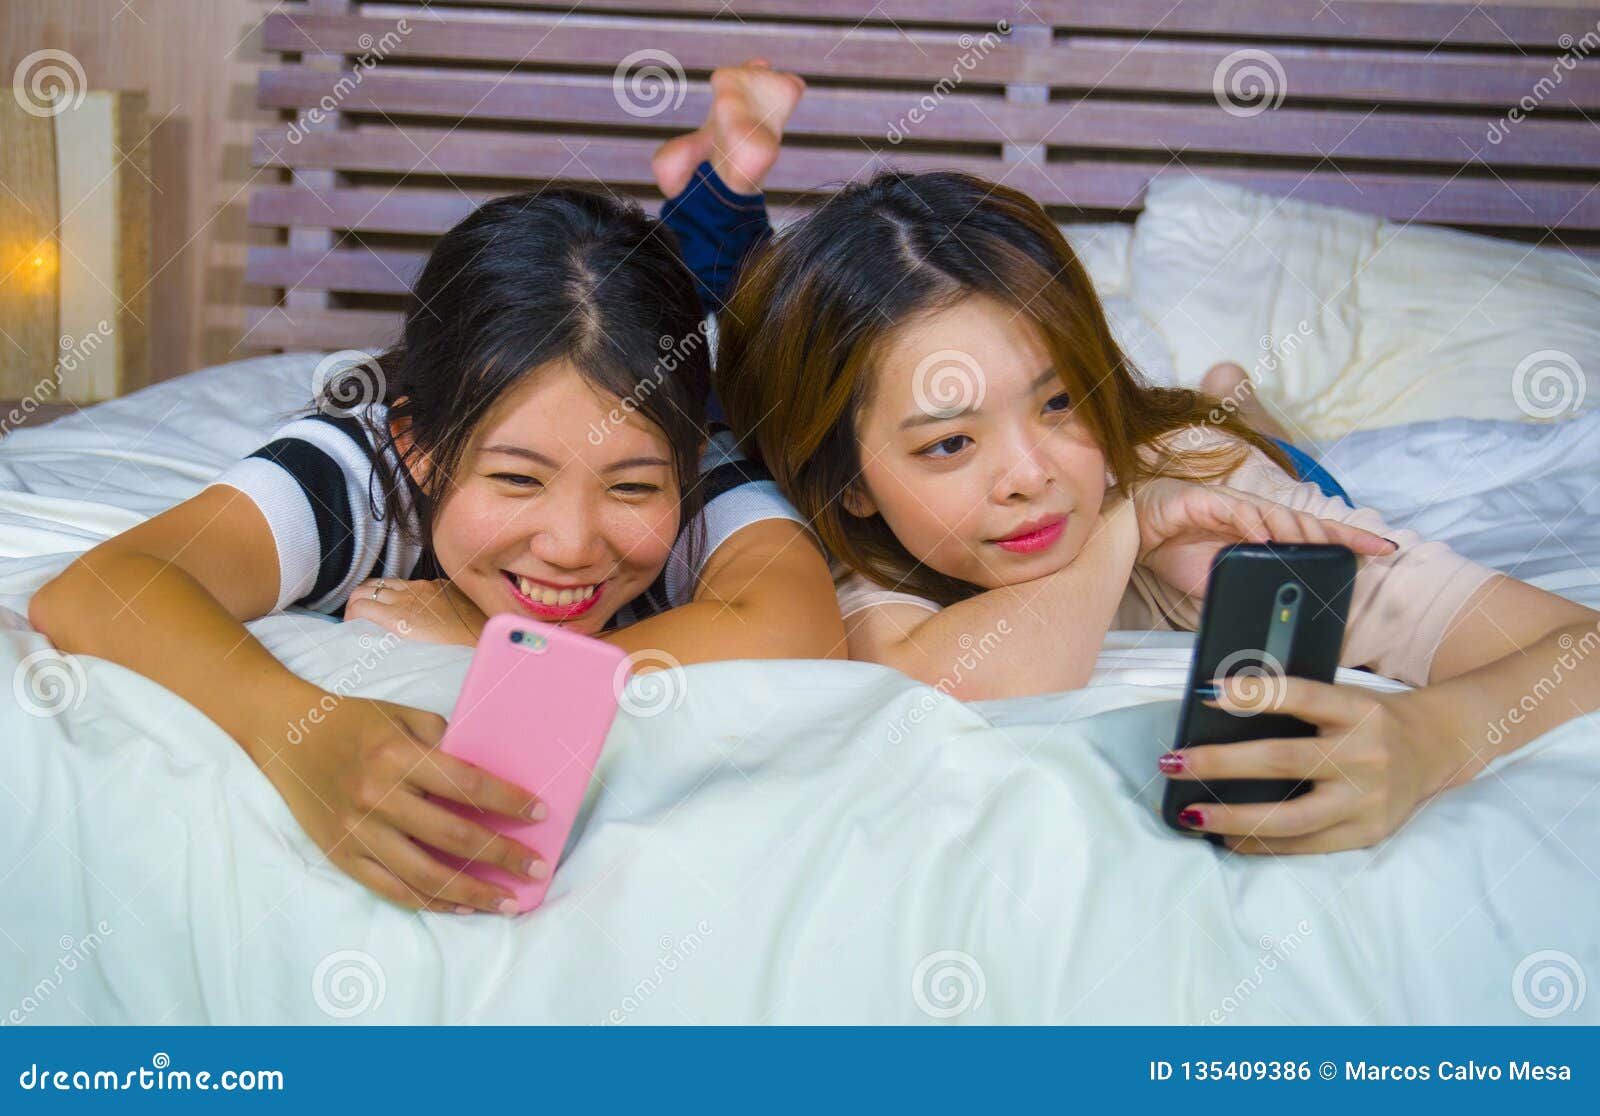 https://thumbs.dreamstime.com/z/young-happy-pretty-asian-chinese-girlfriends-sitting-home-bedroom-laughing-talking-having-fun-using-internet-social-two-135409386.jpg